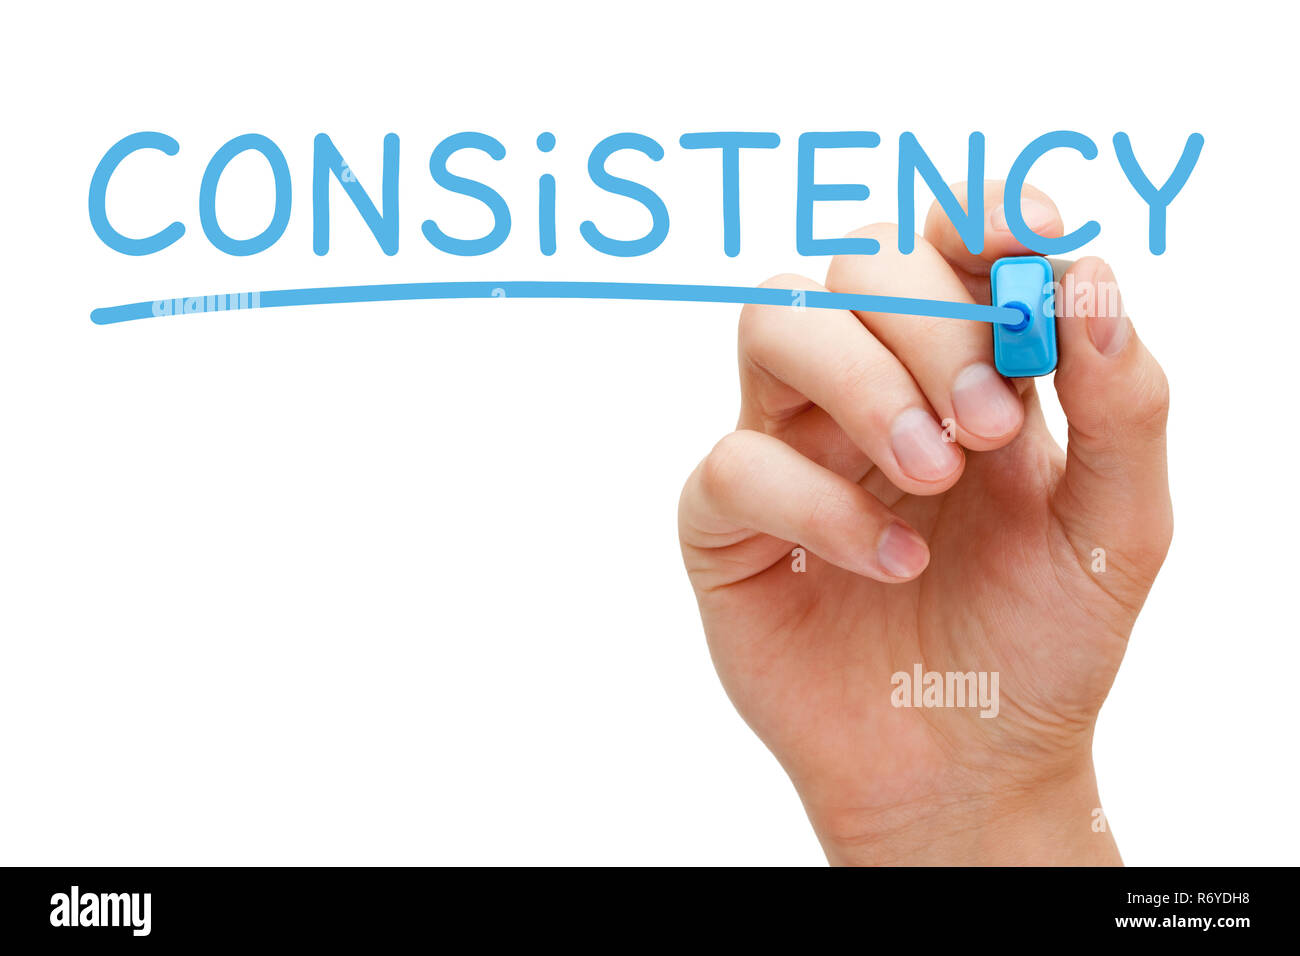 Consistency Handwritten With Blue Marker Stock Photo